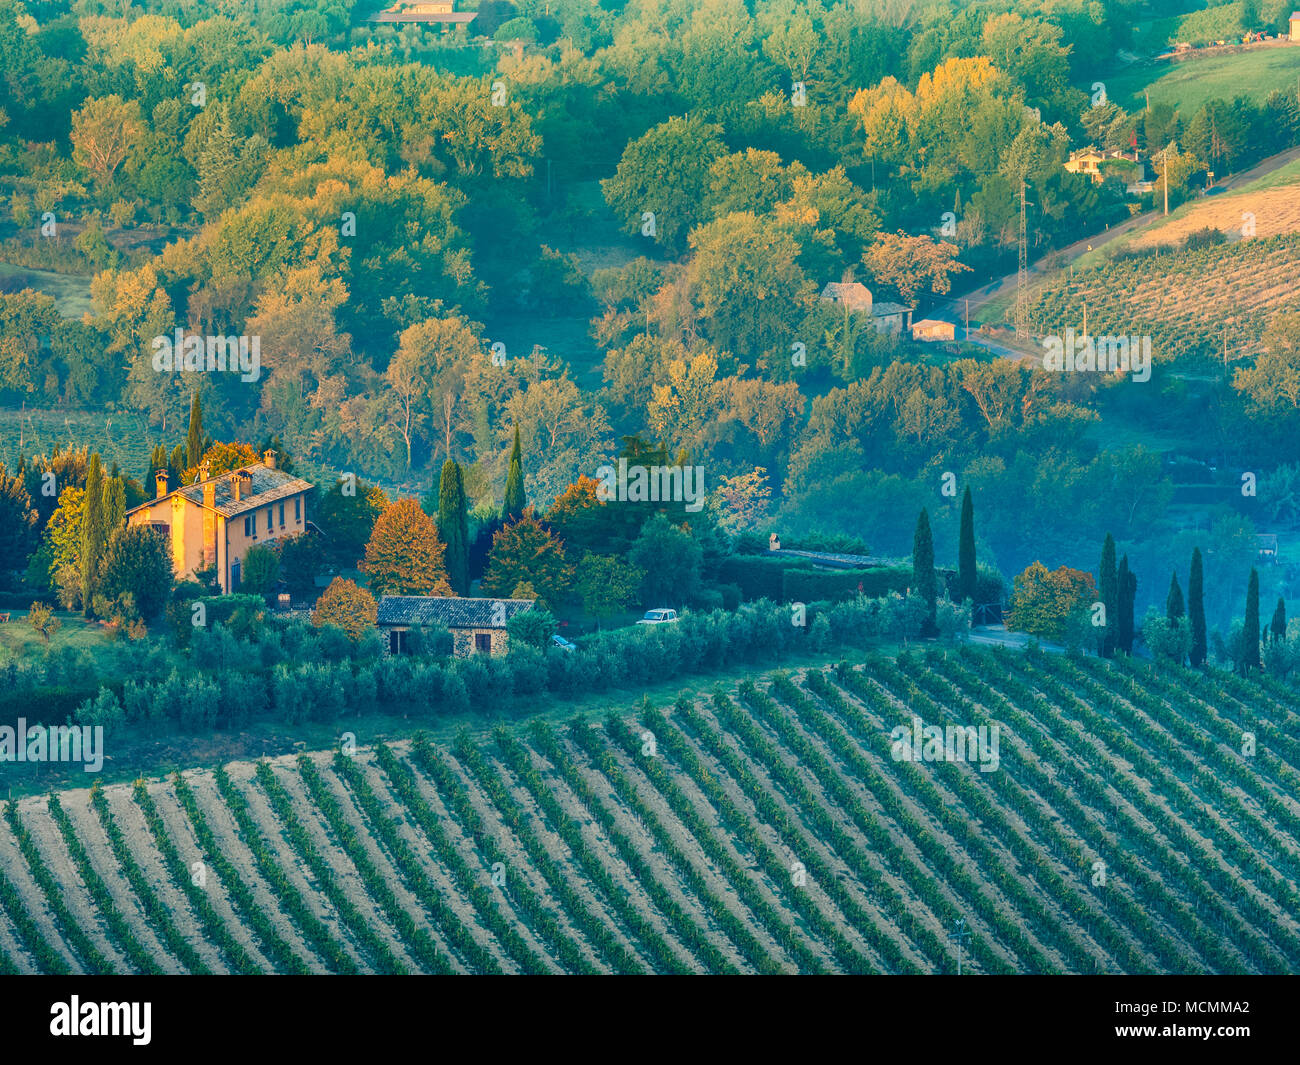 Grape vines in the Umbrian countryside, Italy Stock Photo